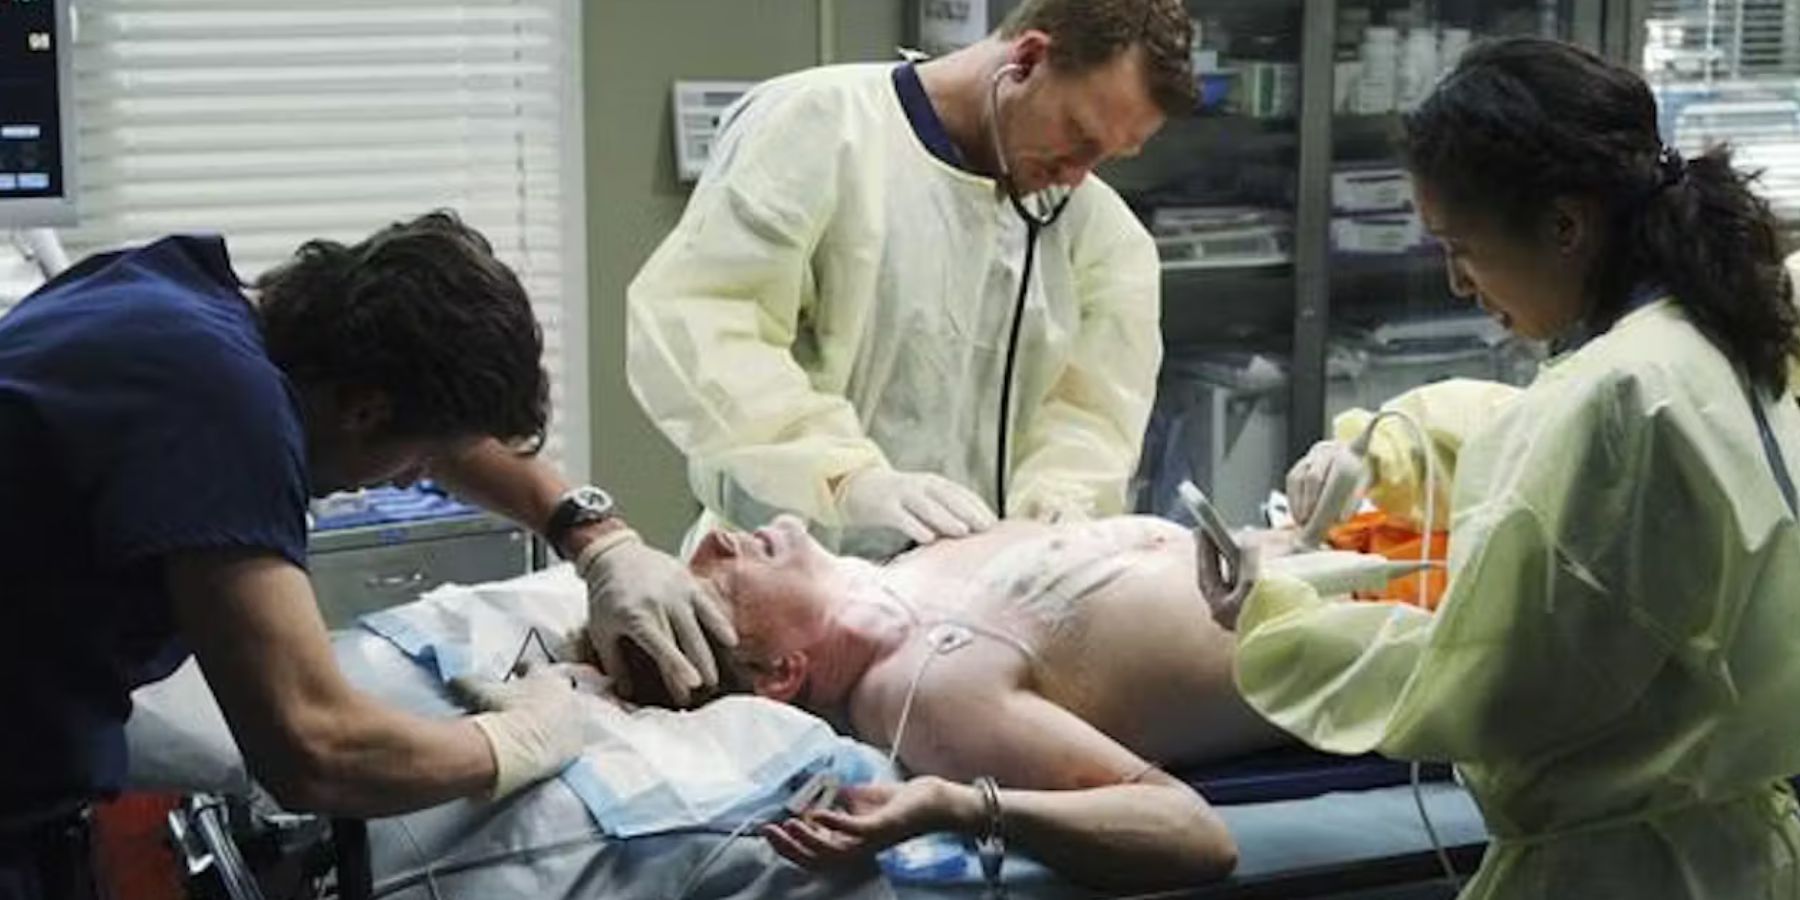 11 Grey's Anatomy Medical Scenes That Are Totally Inaccurate